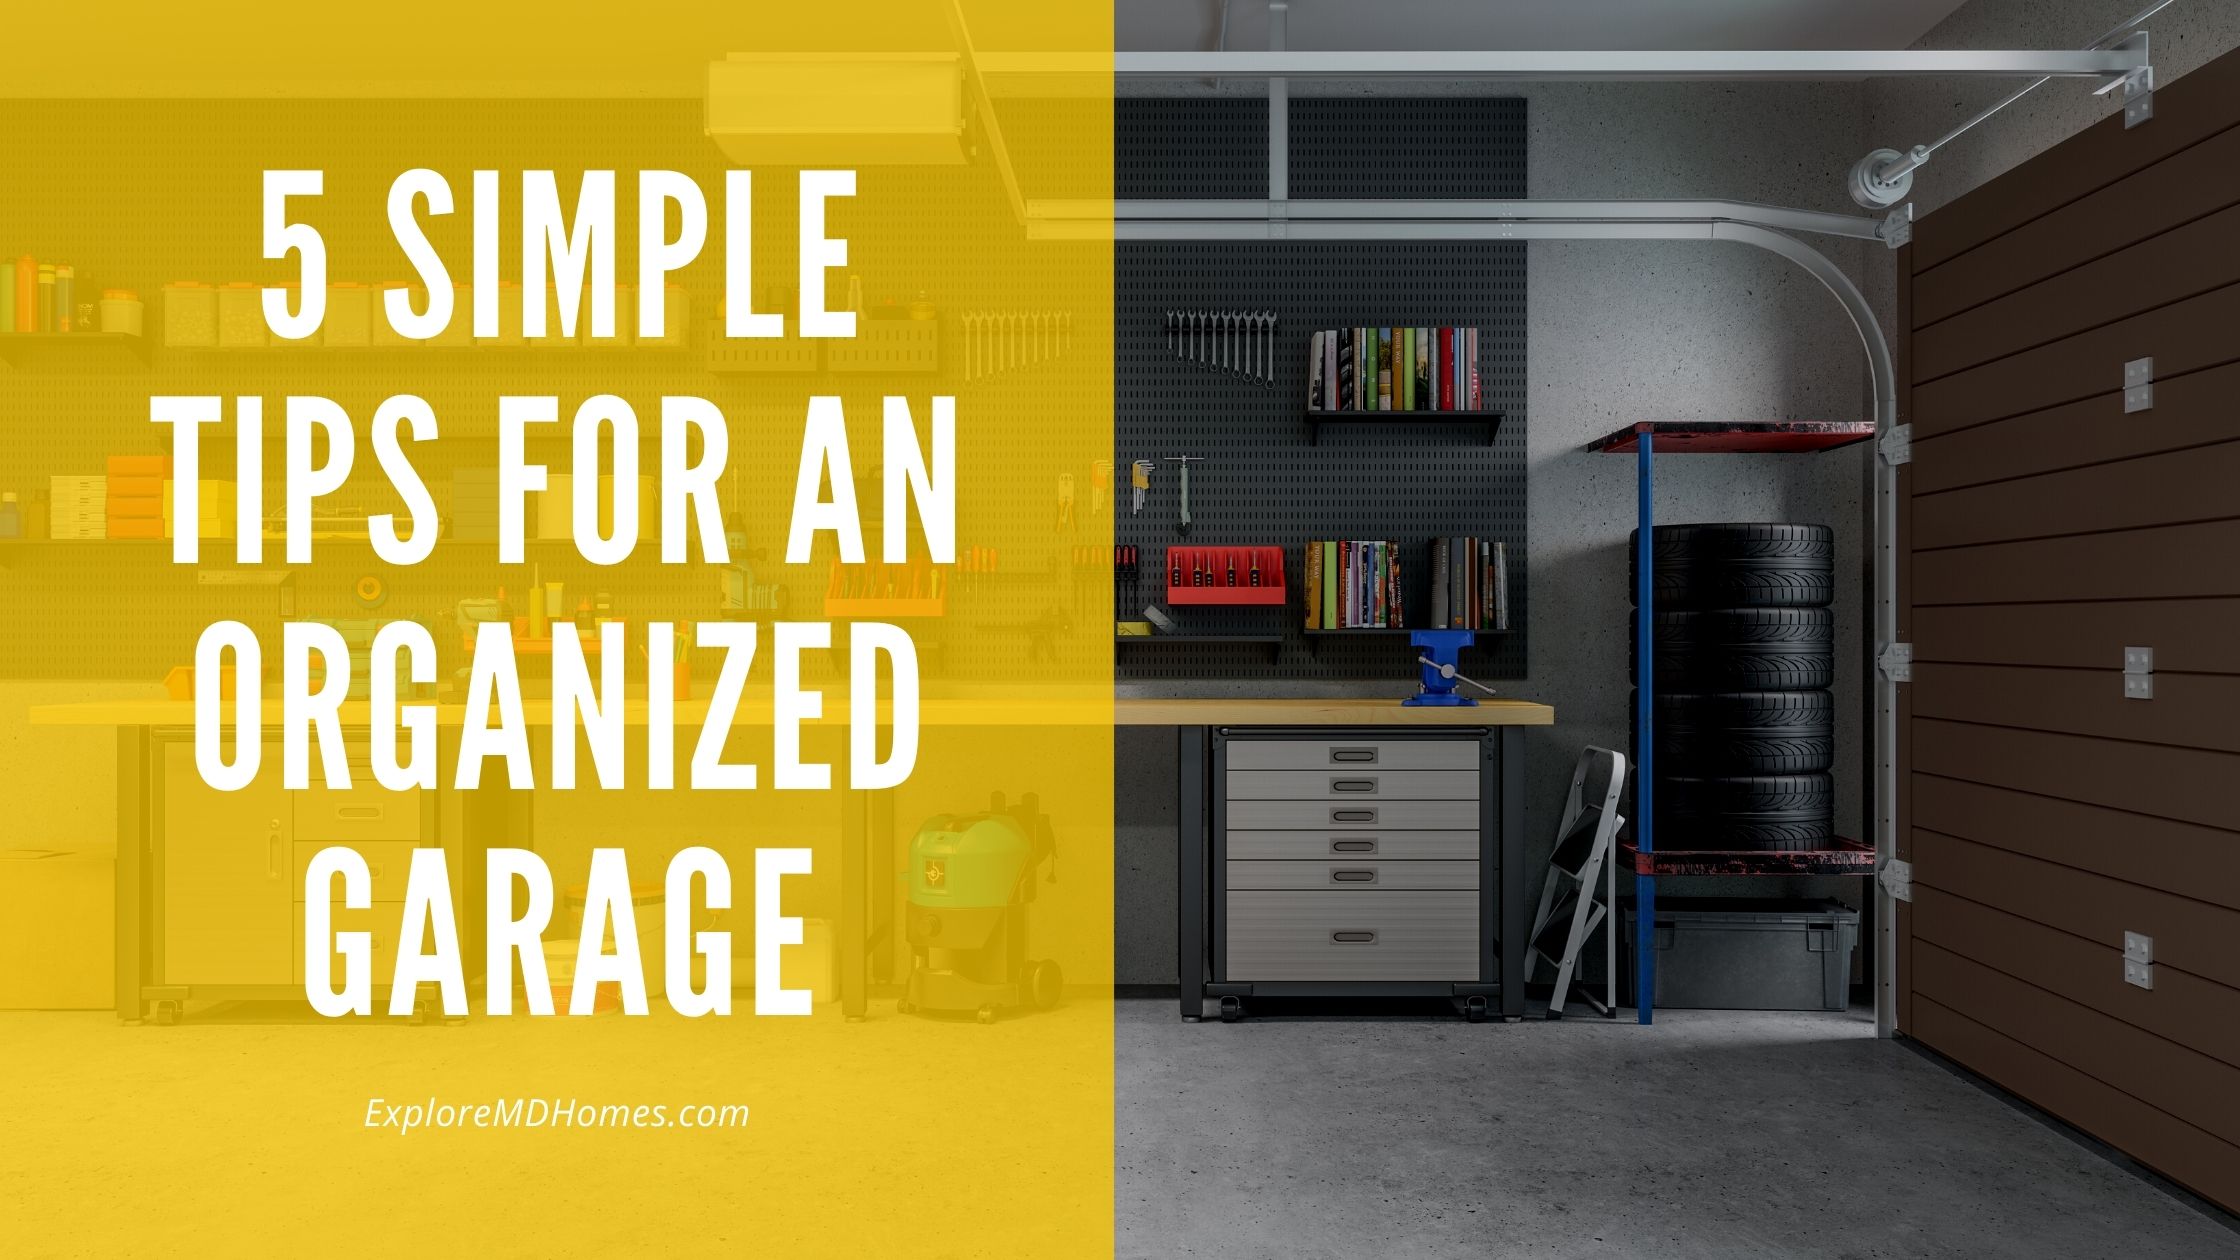 5 Simple Tips for an Organized Garage